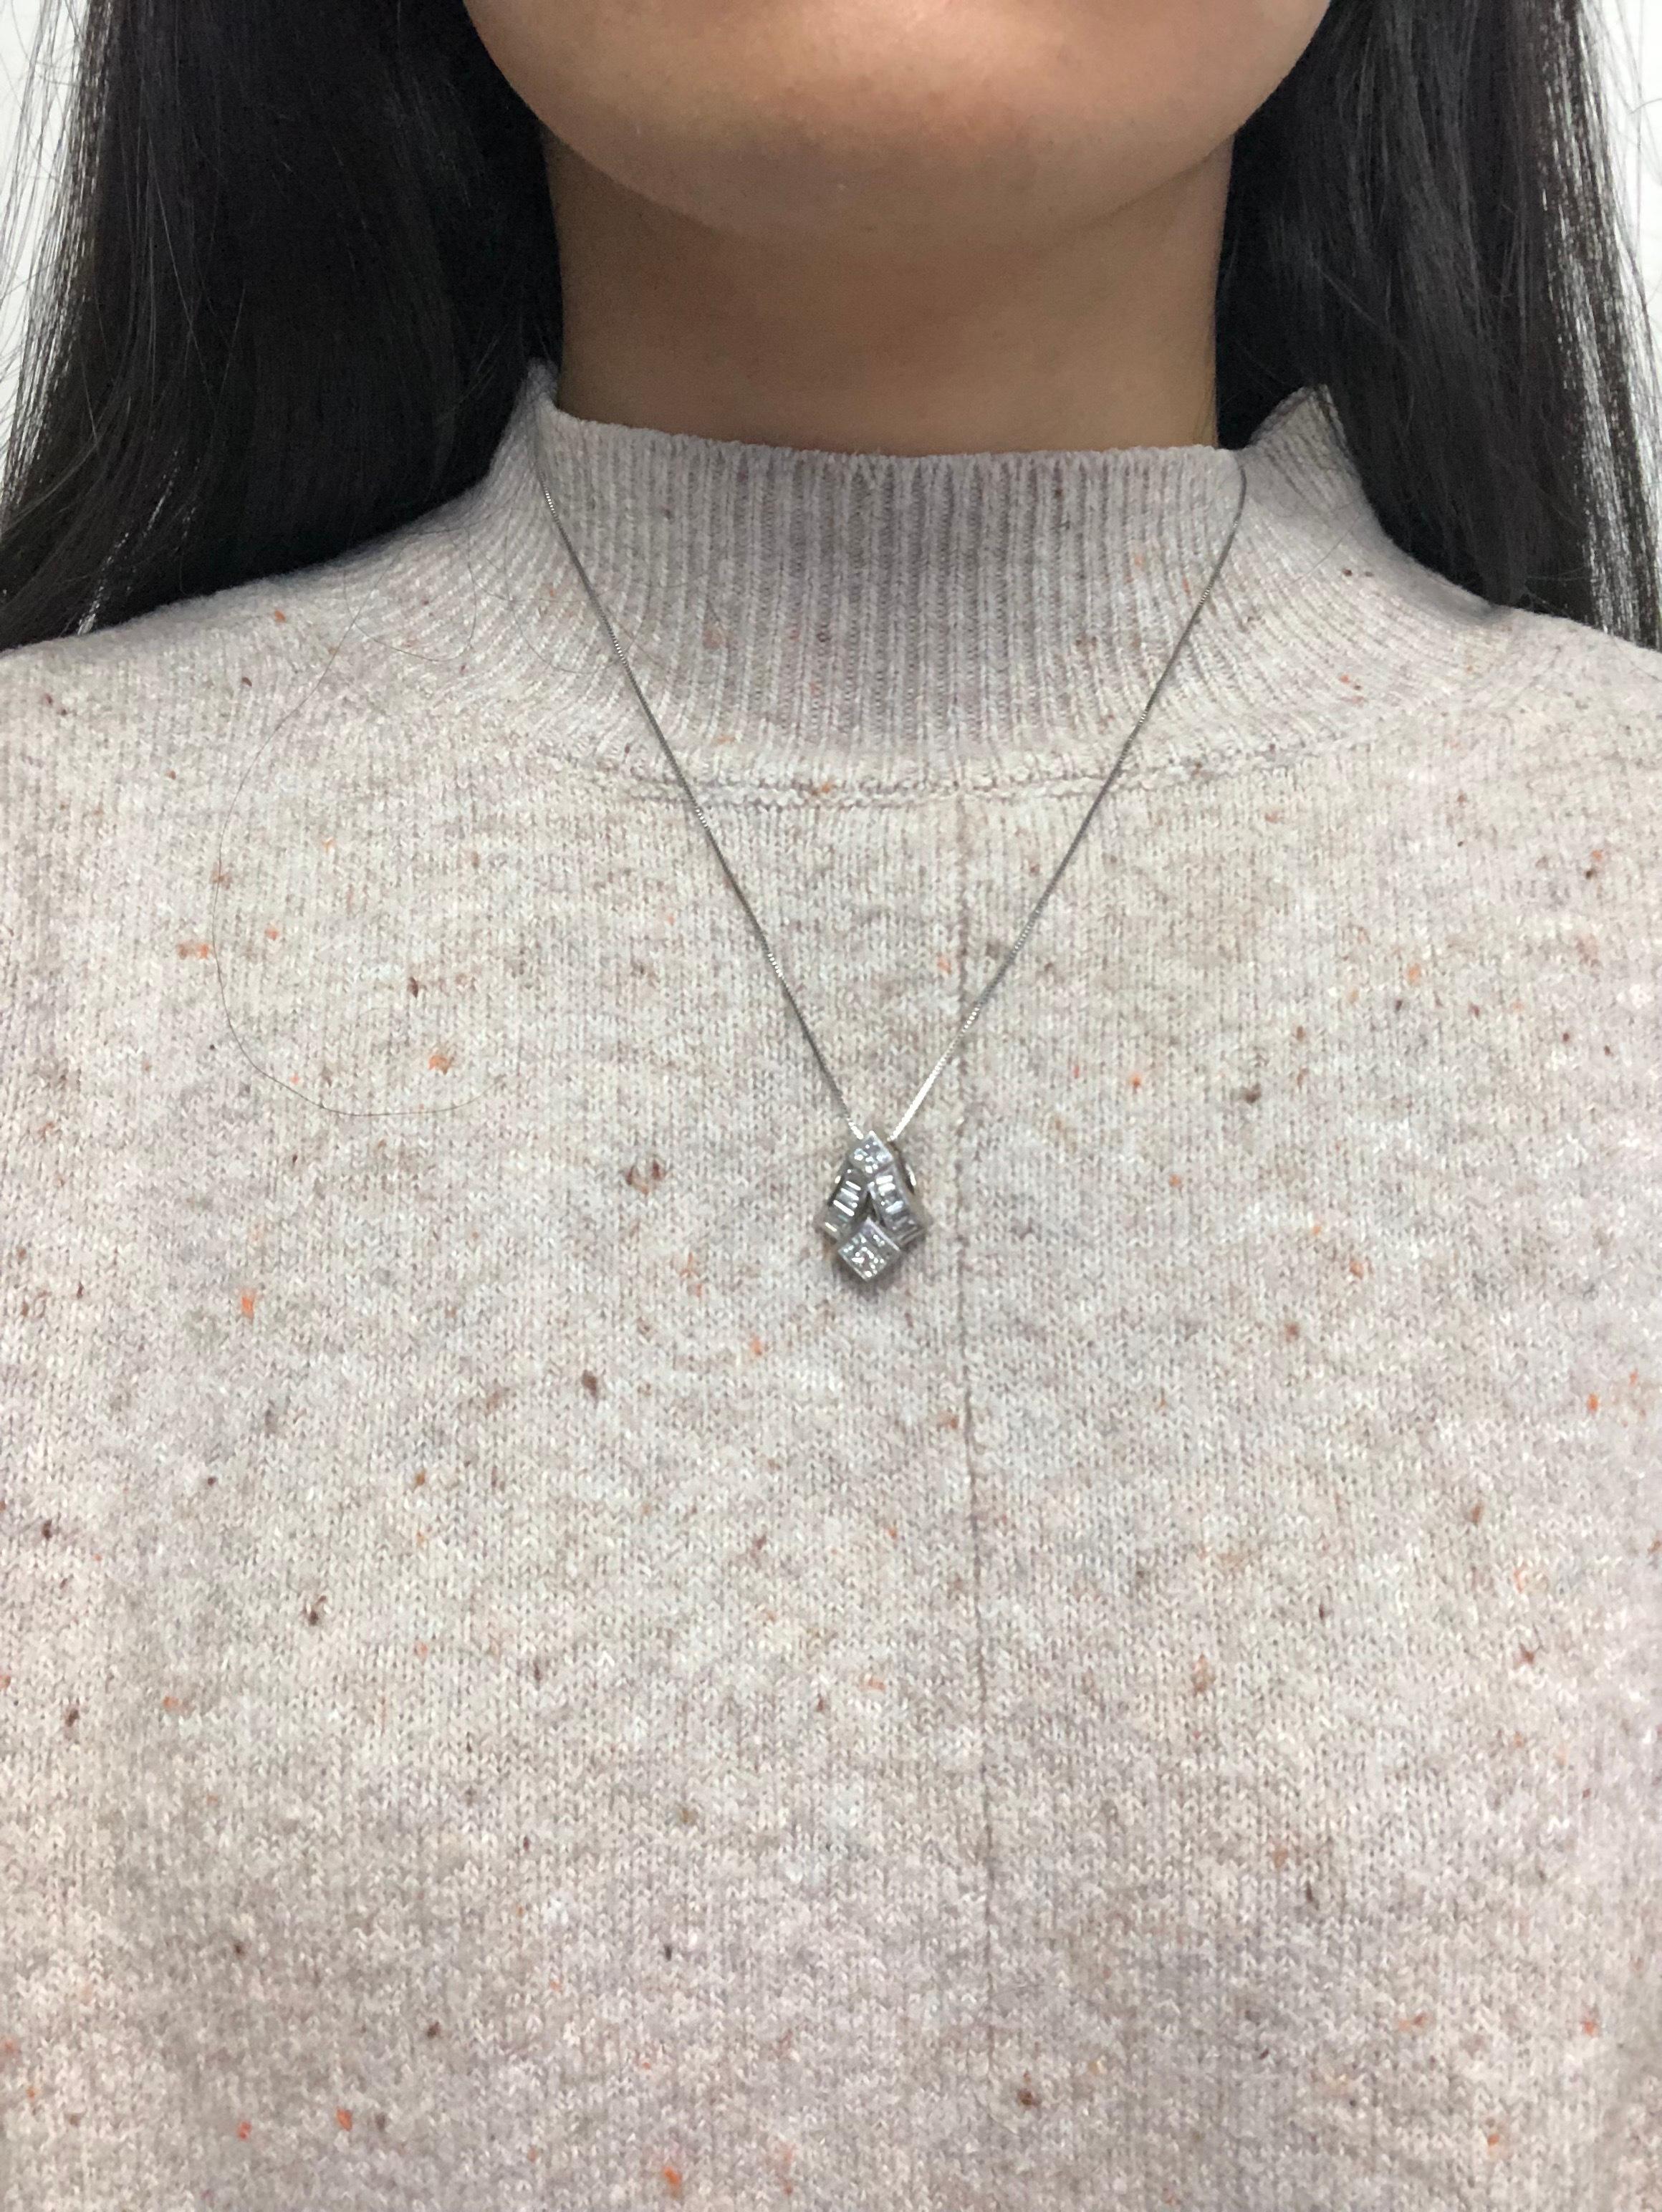 Embrace enduring love and timeless elegance with this exquisite pendant necklace. Expertly crafted from 14 karats white gold and polished to a brilliant shine, this pendant necklace showcases a sophisticated design featuring an enchanting